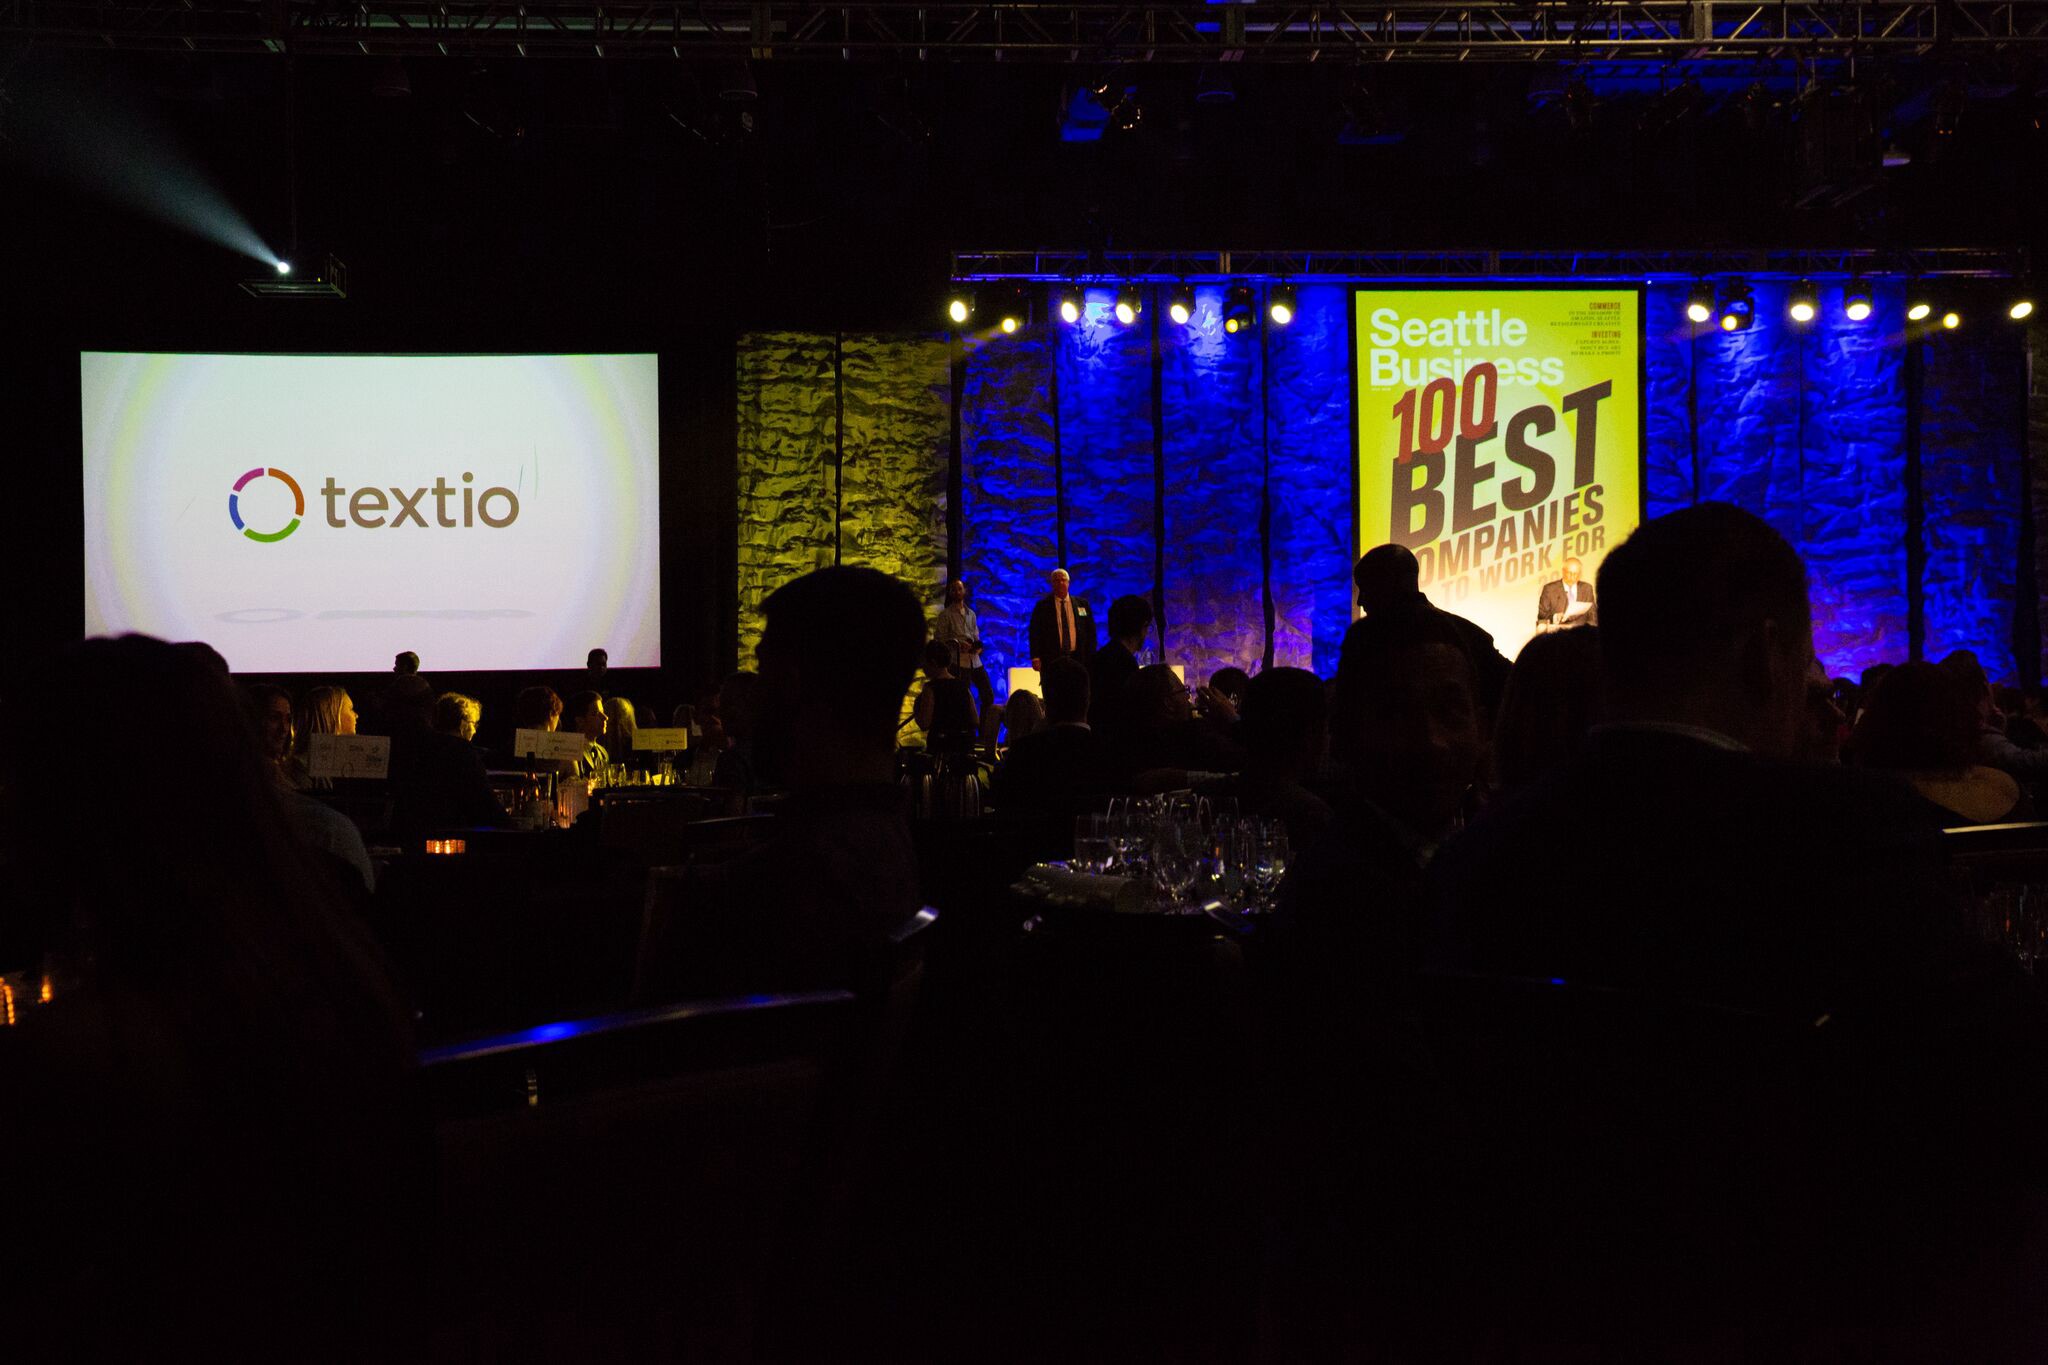 Textio on the screen at the Best Places to Work awards ceremony